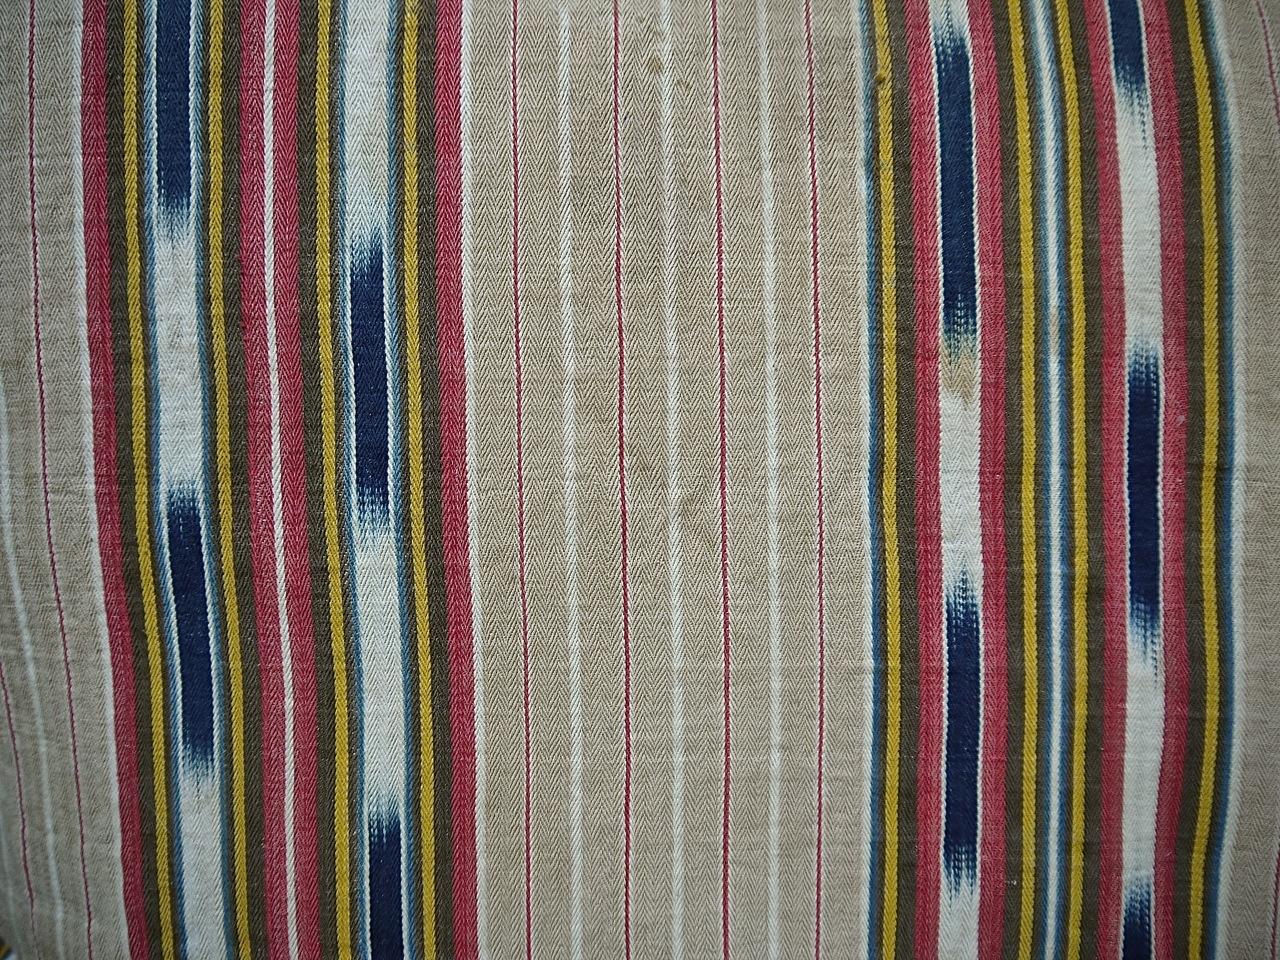  Striped Ikat Ticking Floor Pillow French 19th Century In Good Condition For Sale In London, GB